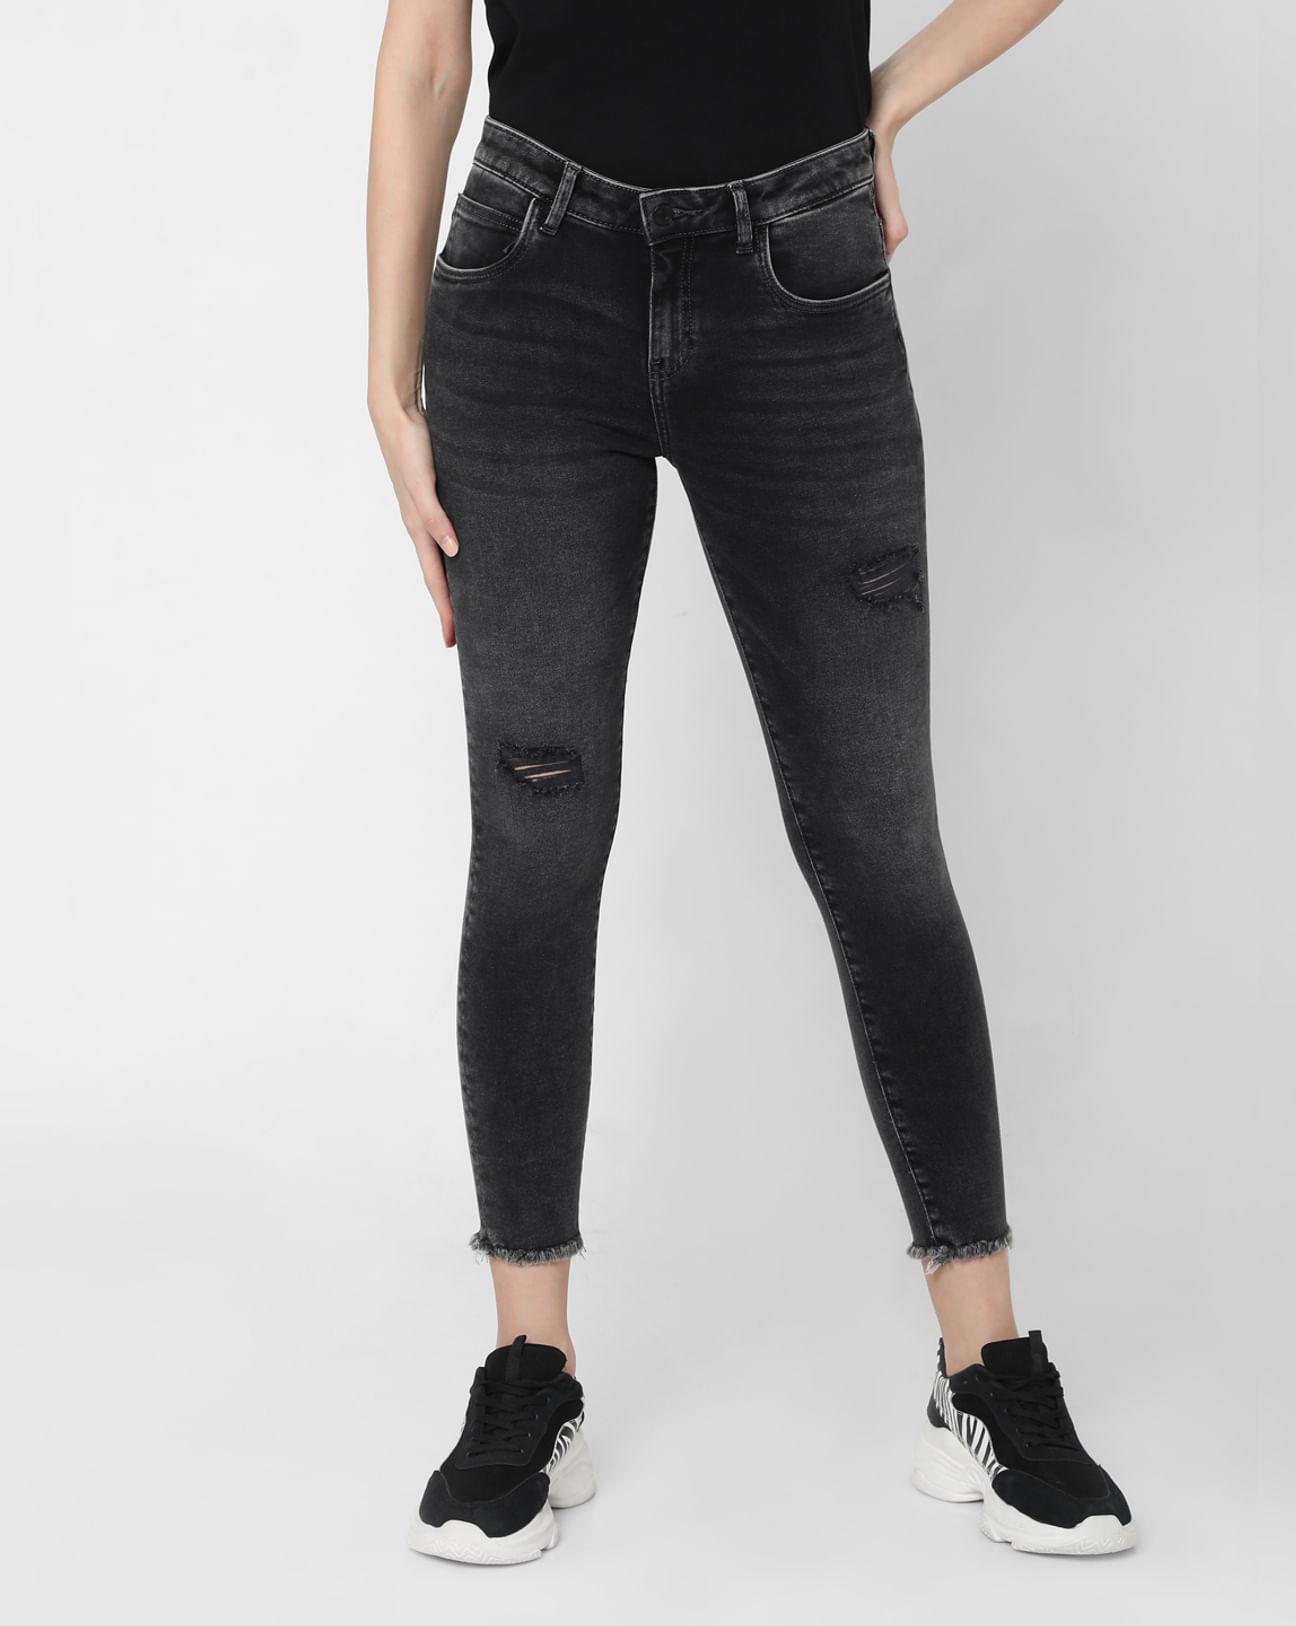 grey high rise frayed skinny jeans